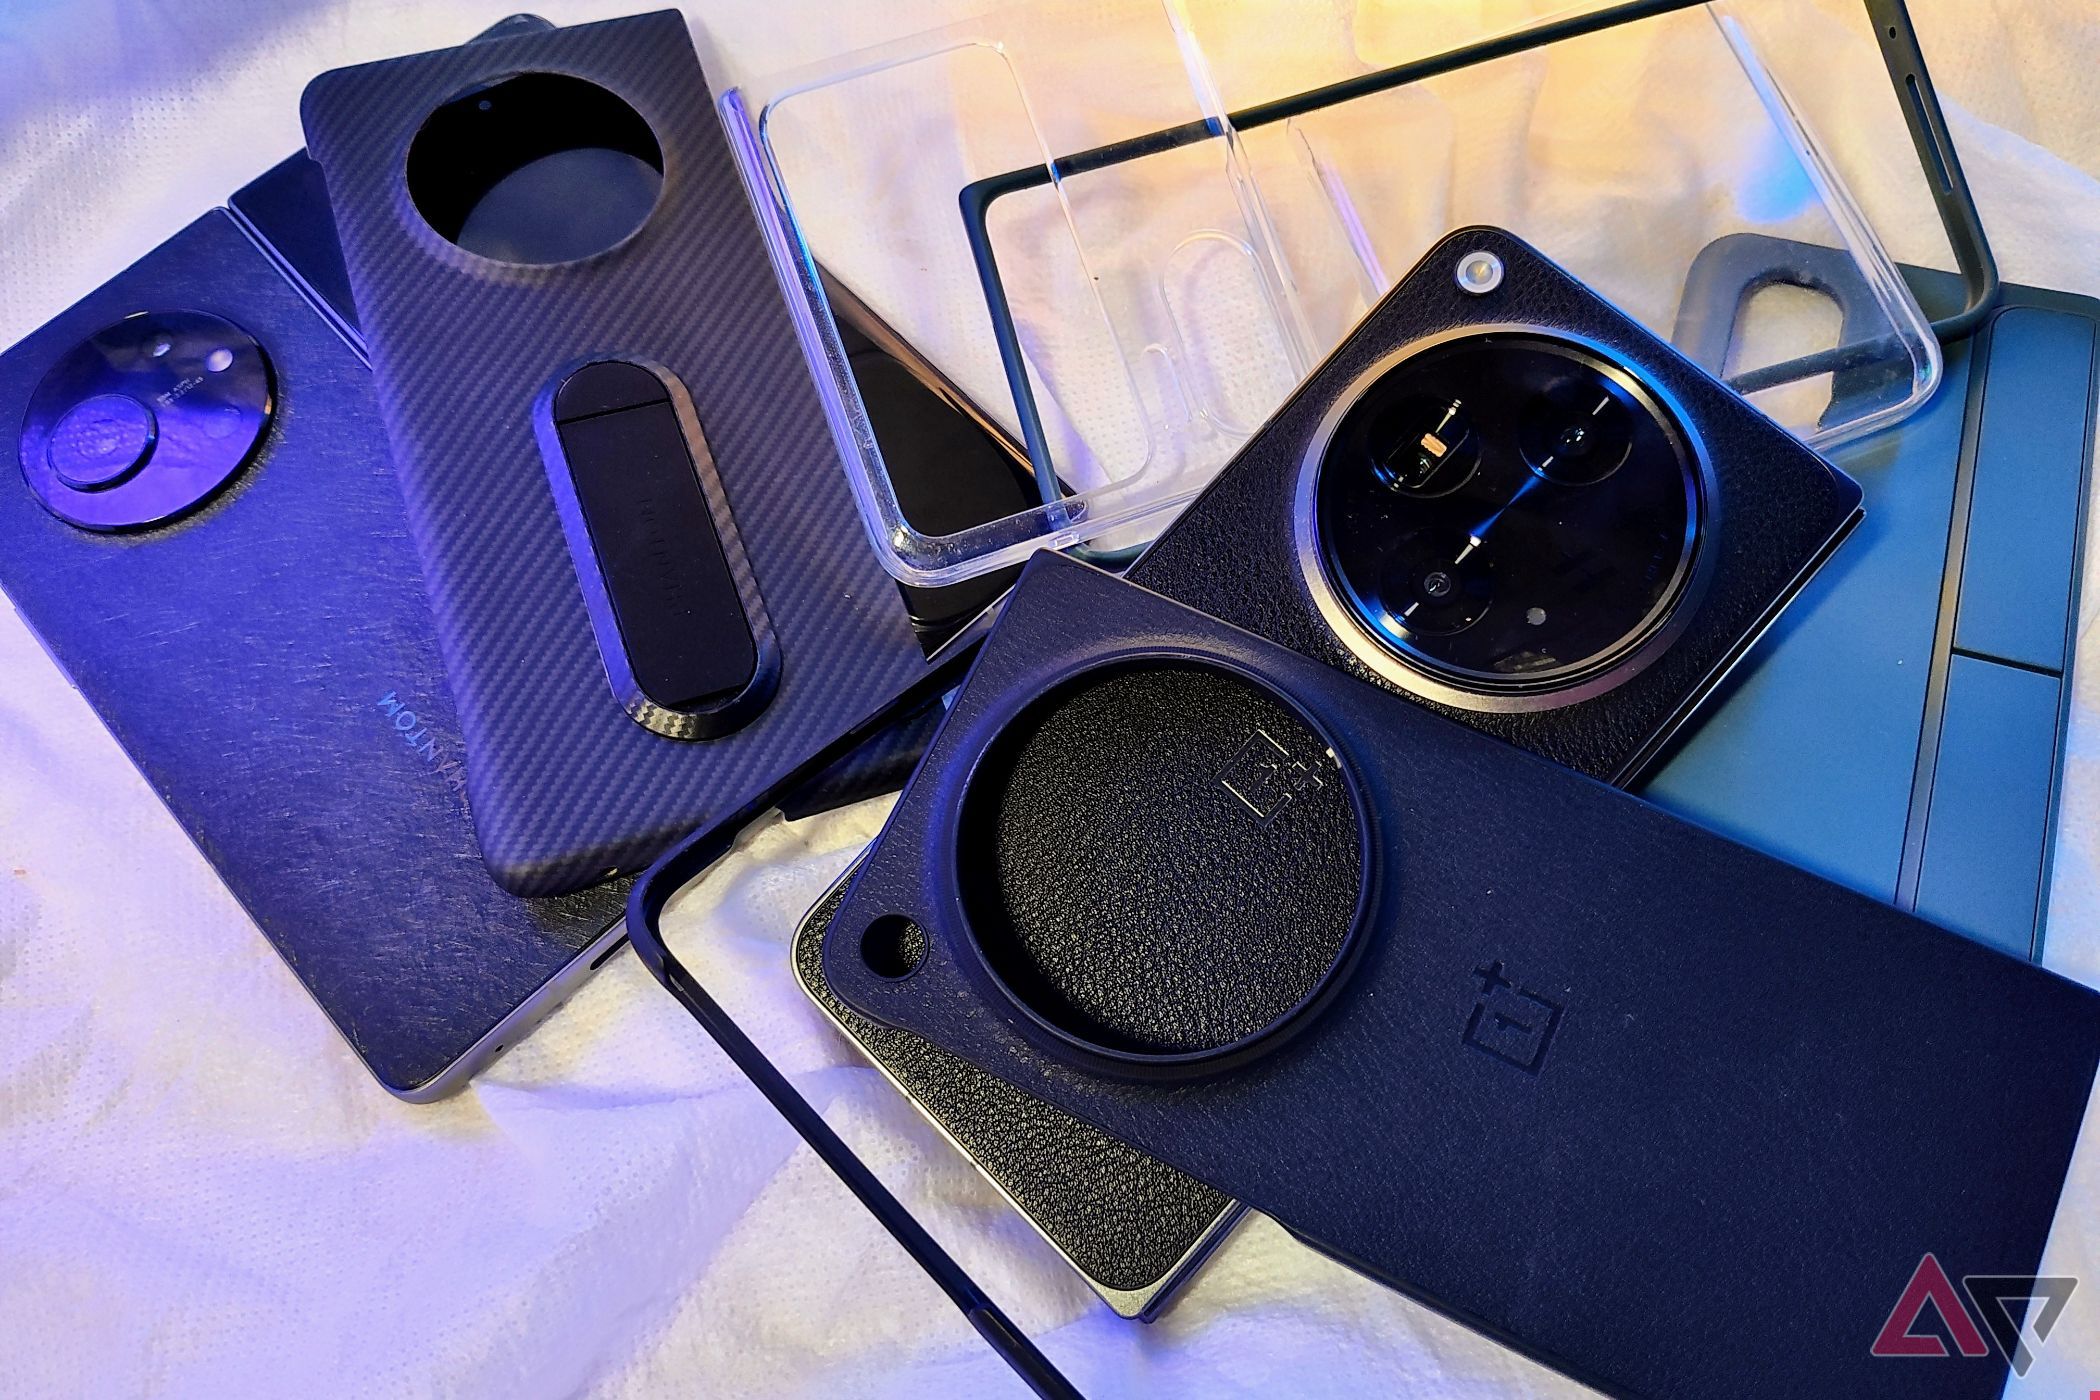 OnePlus Ope and Tecno Phantom V with cases on a table